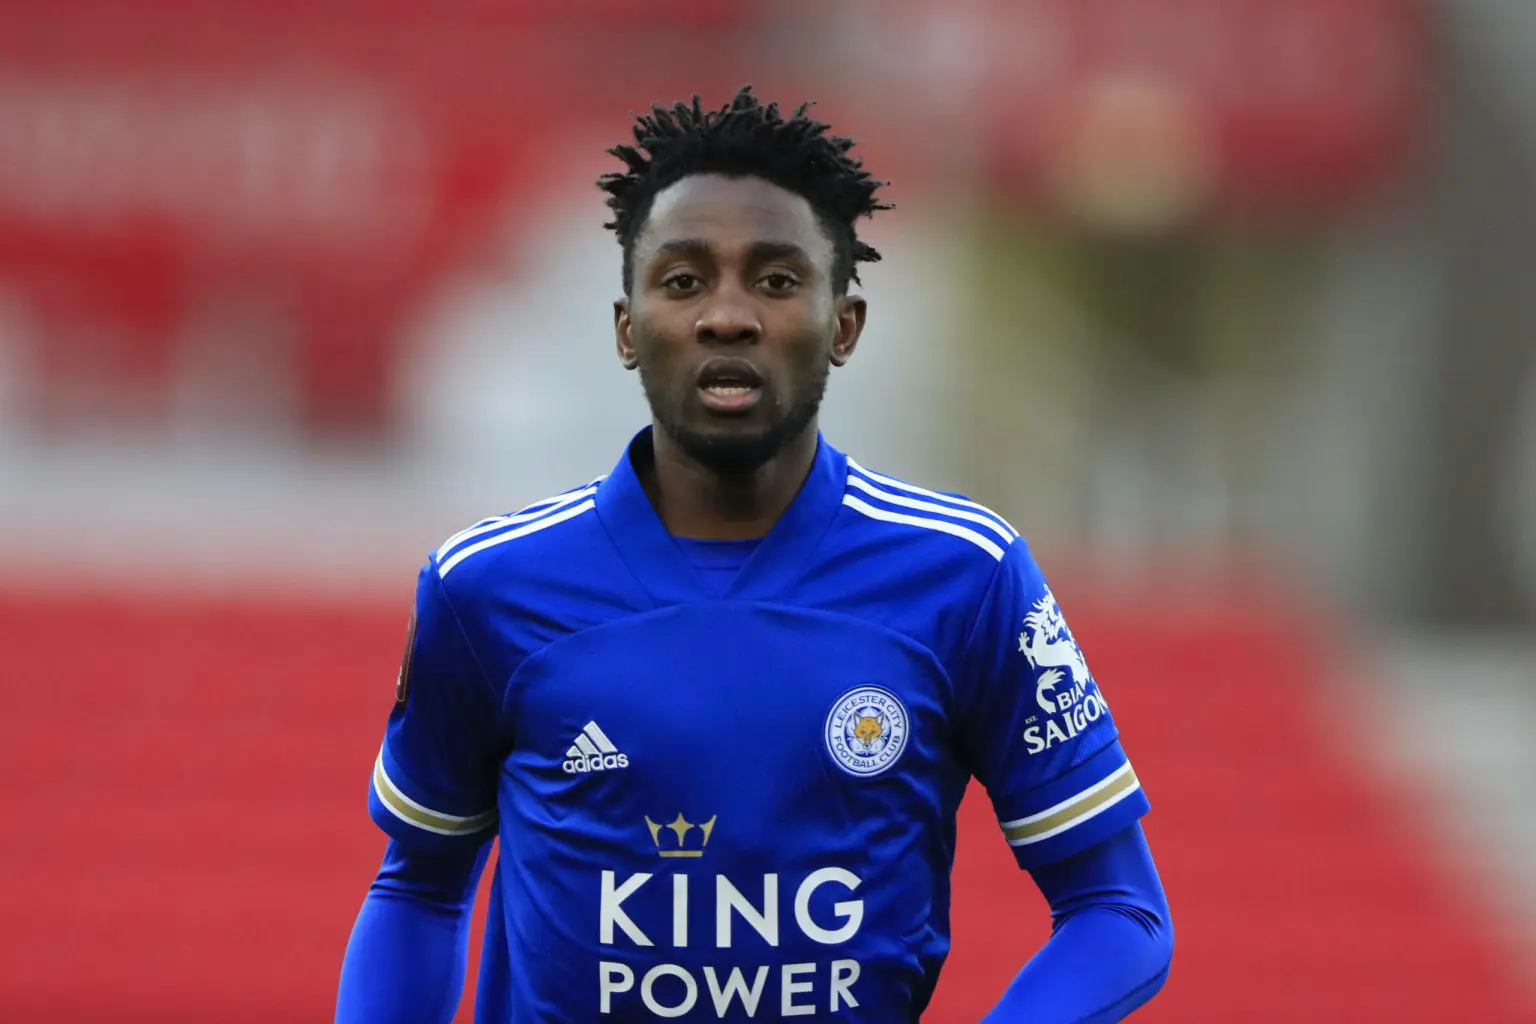 Serie A giants, Juventus are targeting a move to Leicester City midfielder, Wilfred Ndidi this summer. Ndidi is into the final